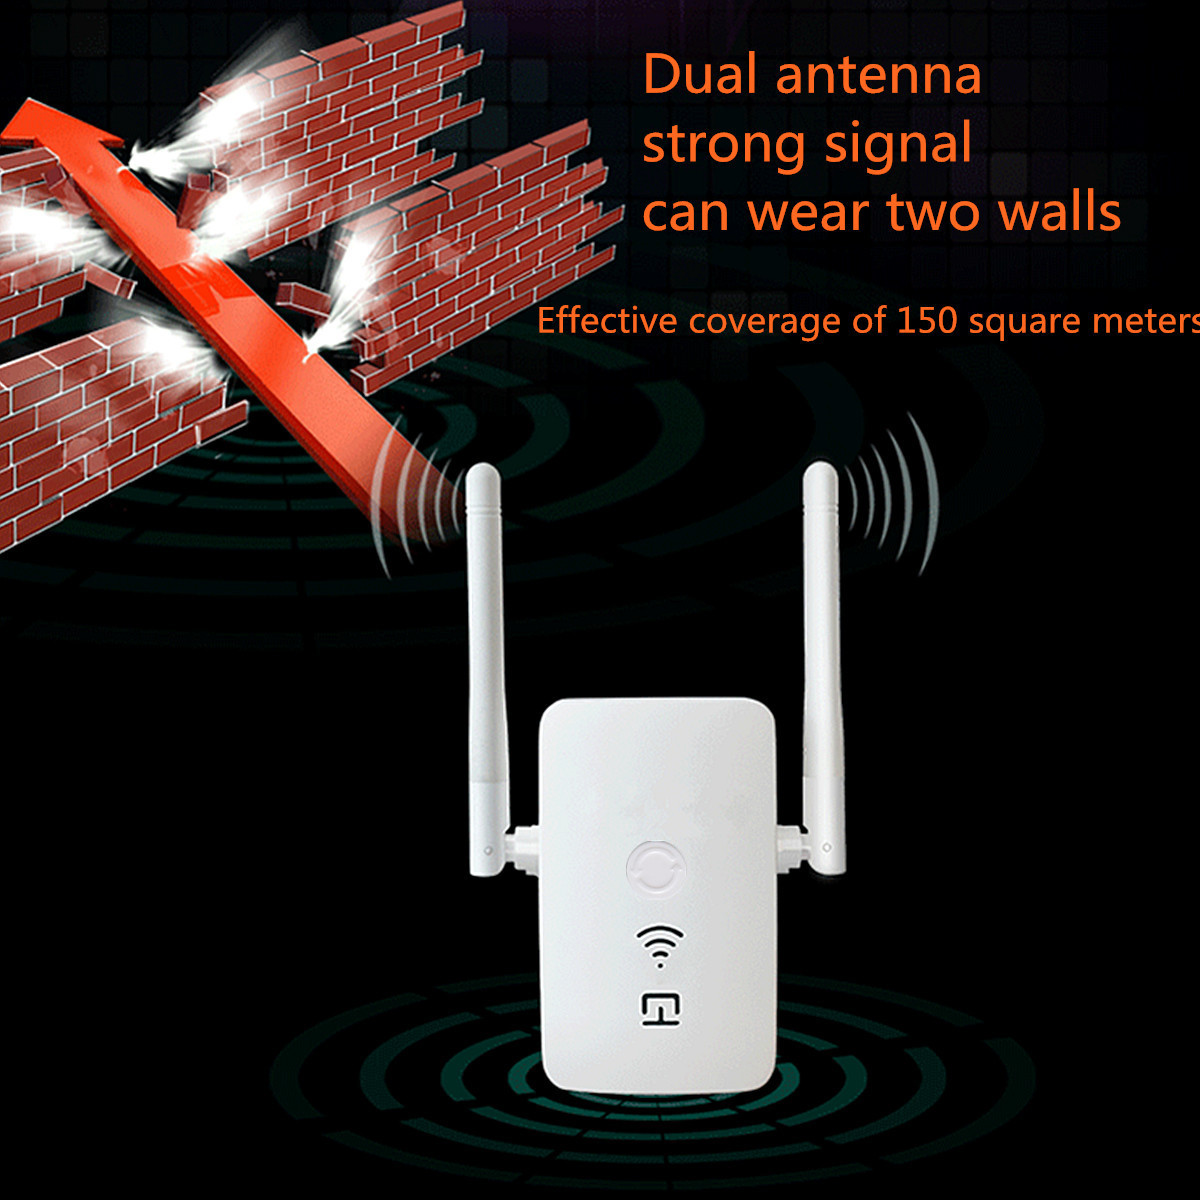 150Mbps-Wireless-WiFi-Range-Extender-Signal-Booster-Router-Repeater-Dual-Antenna-with-LAN-USB-Port-1119784-2